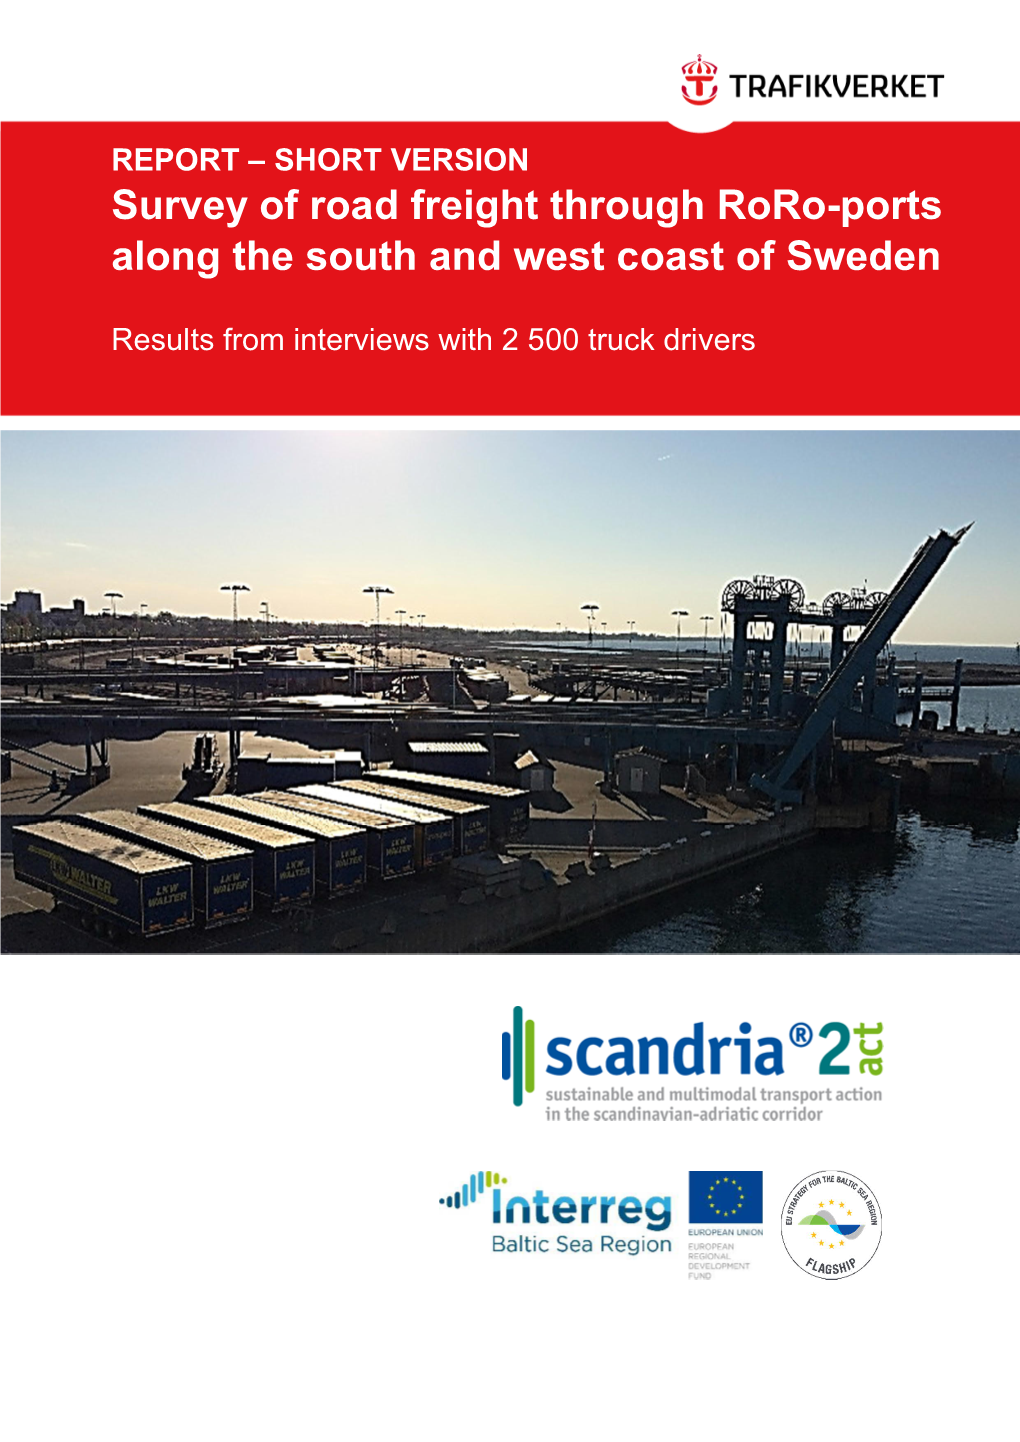 Survey of Road Freight Through Roro-Ports Along the South and West Coast of Sweden